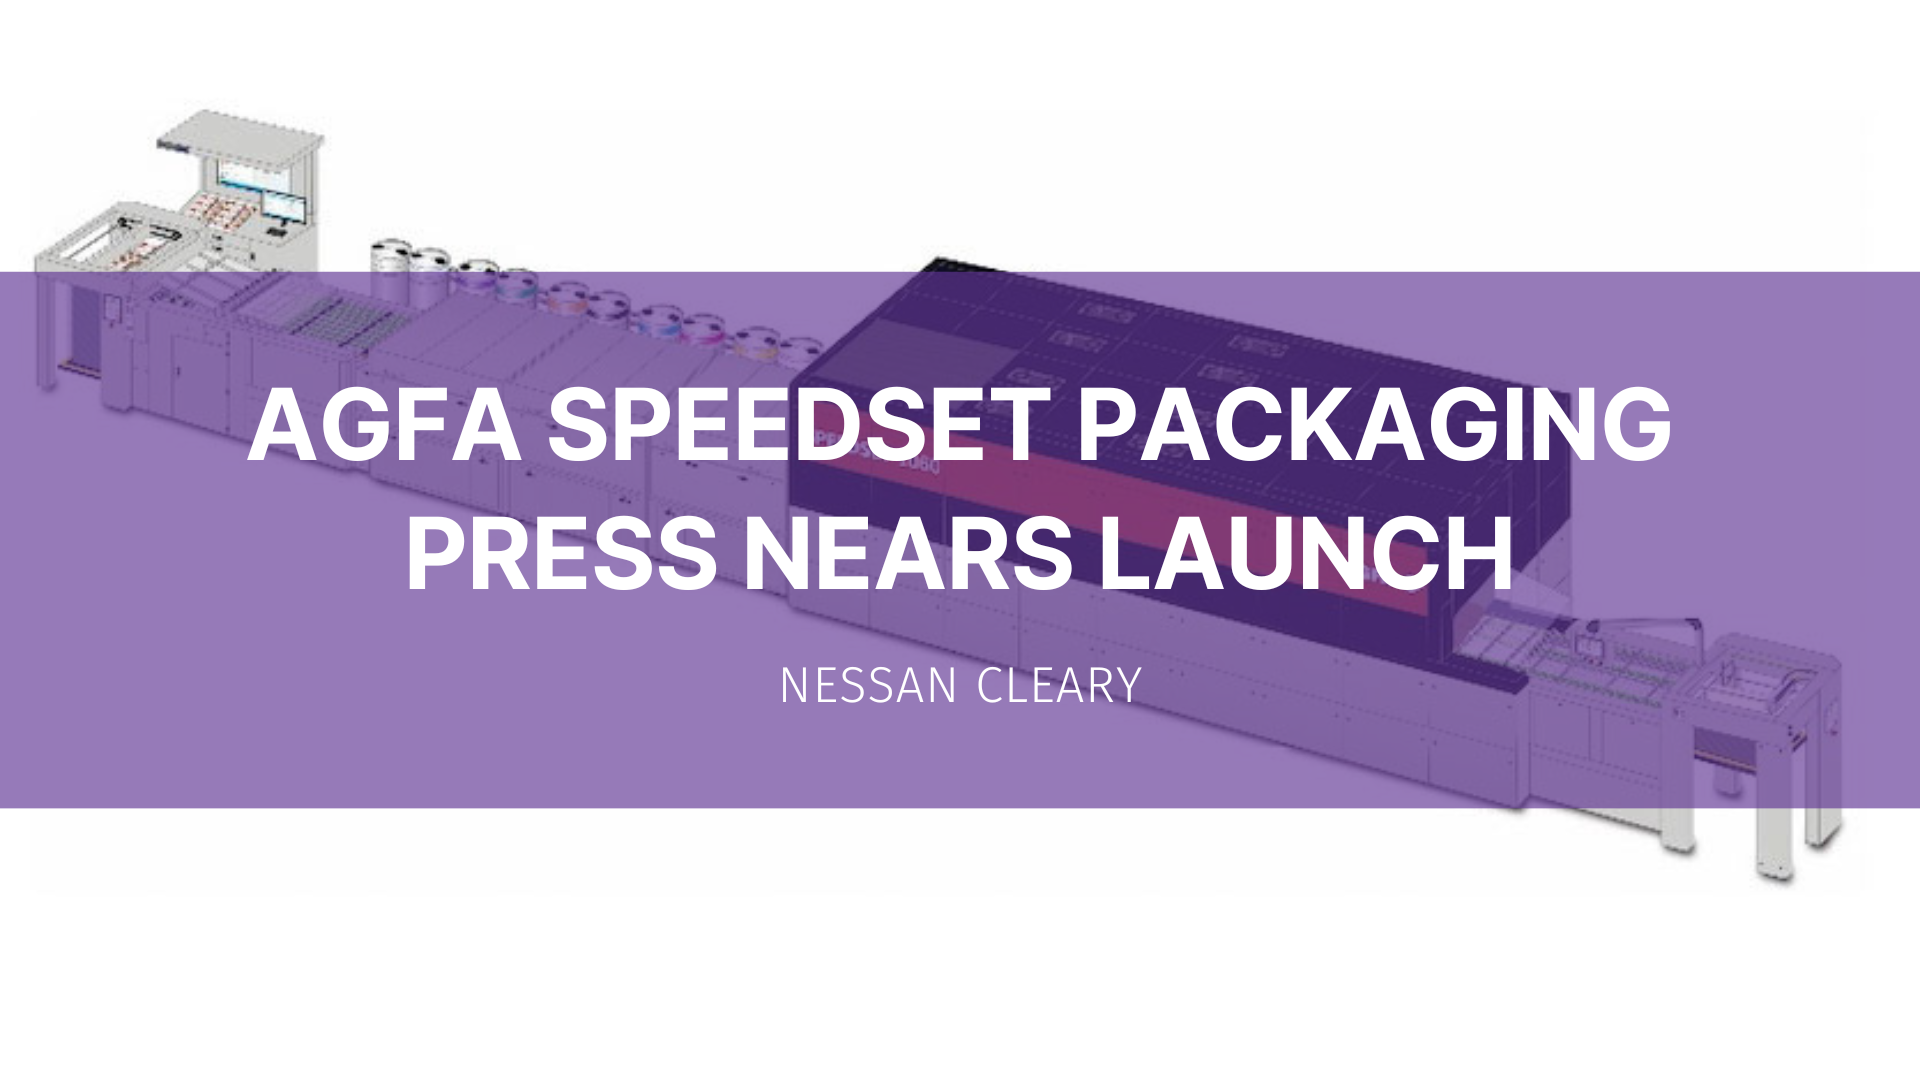 Featured image for “Agfa SpeedSet packaging press nears launch”